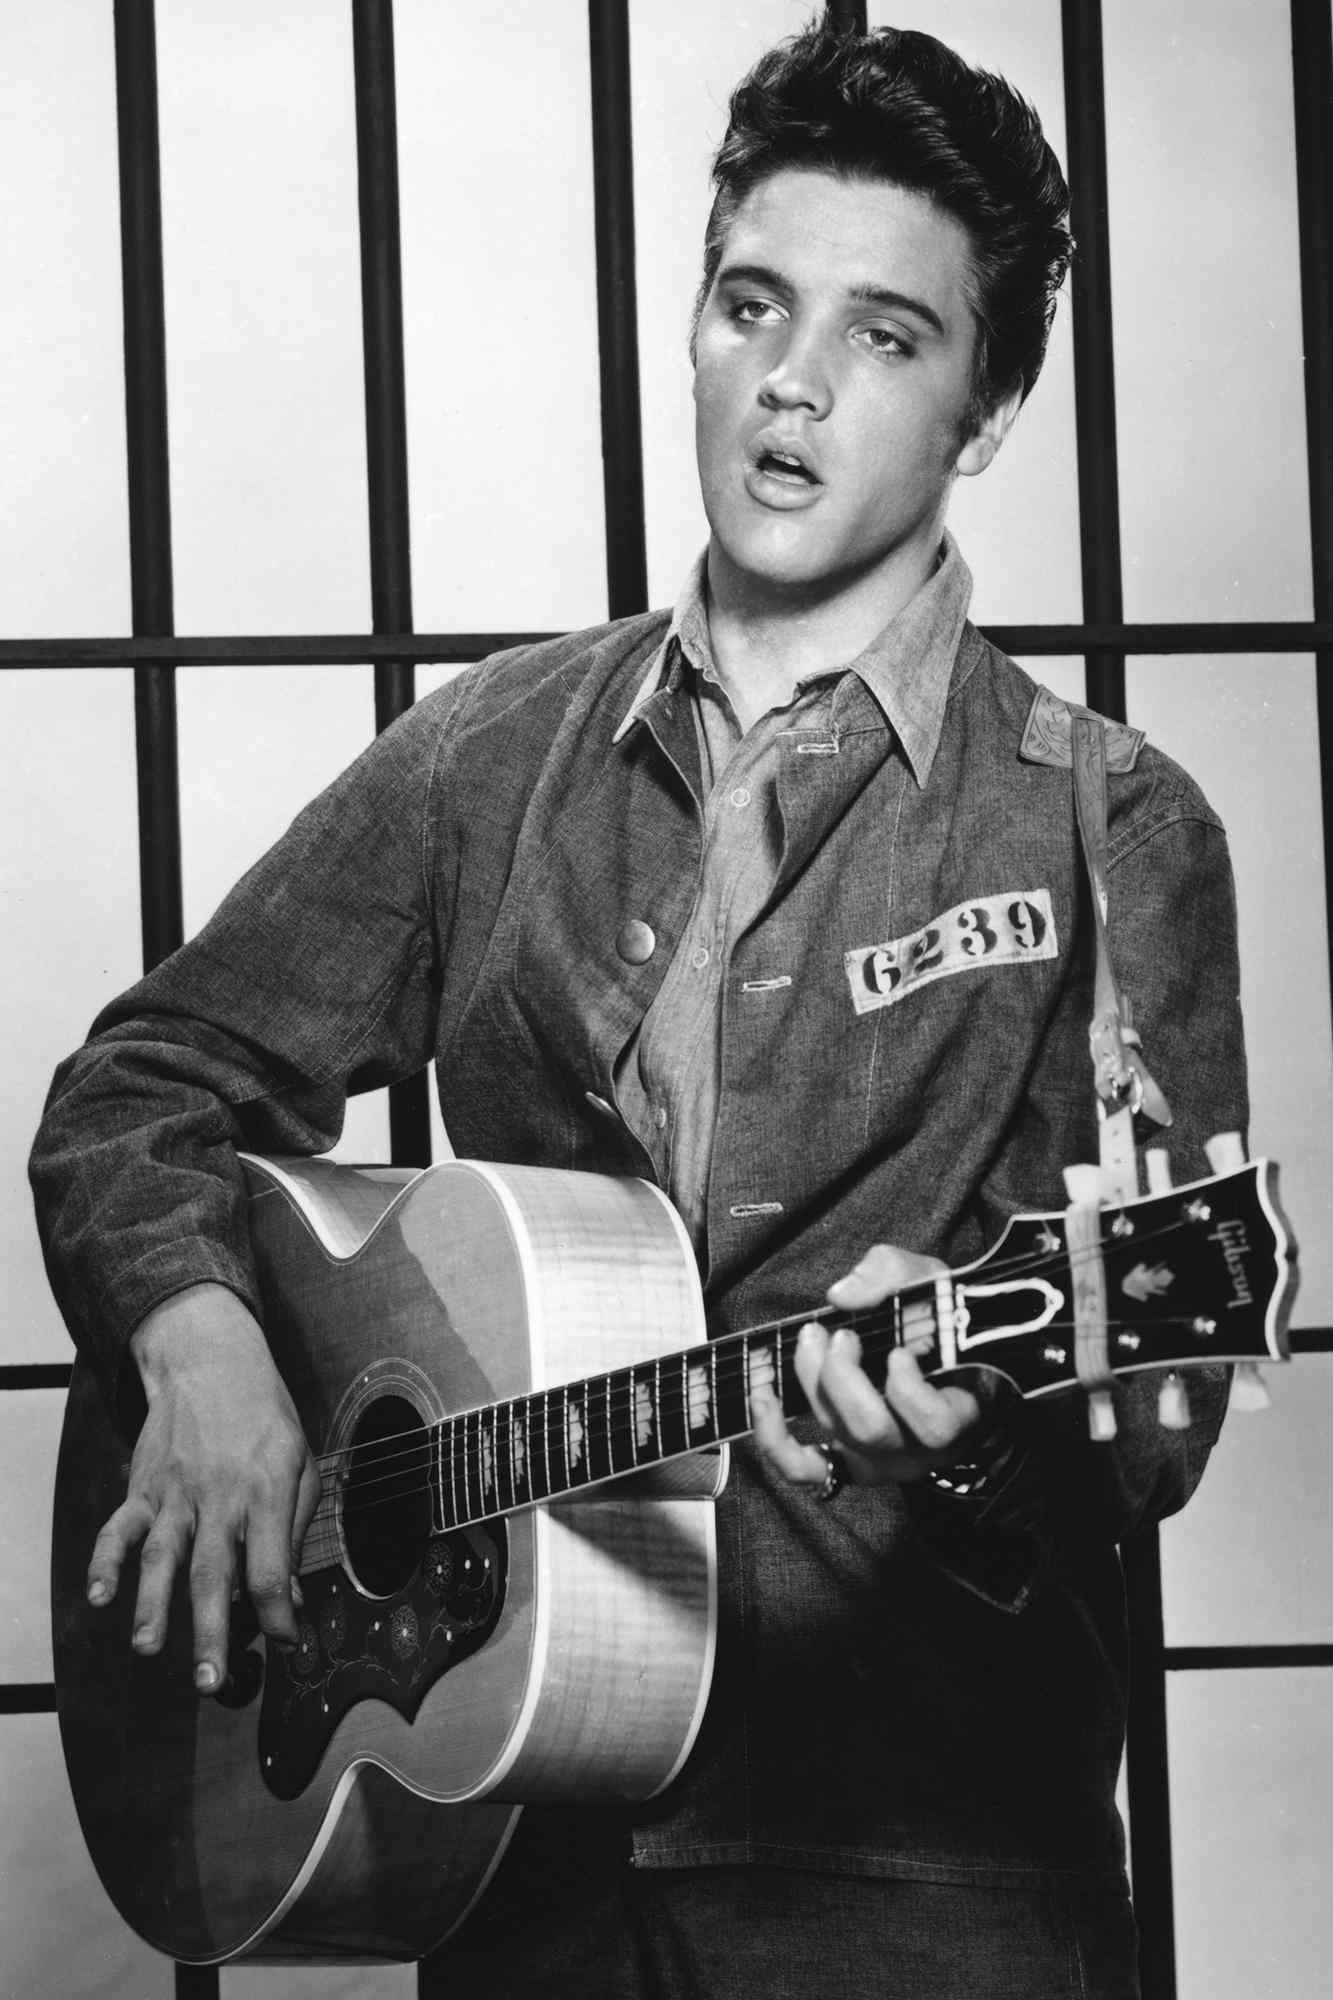 Elvis Presley in a scene from the movie "Jailhouse Rock" which was released in 1957. (Photo by Michael Ochs Archives/Getty Images)